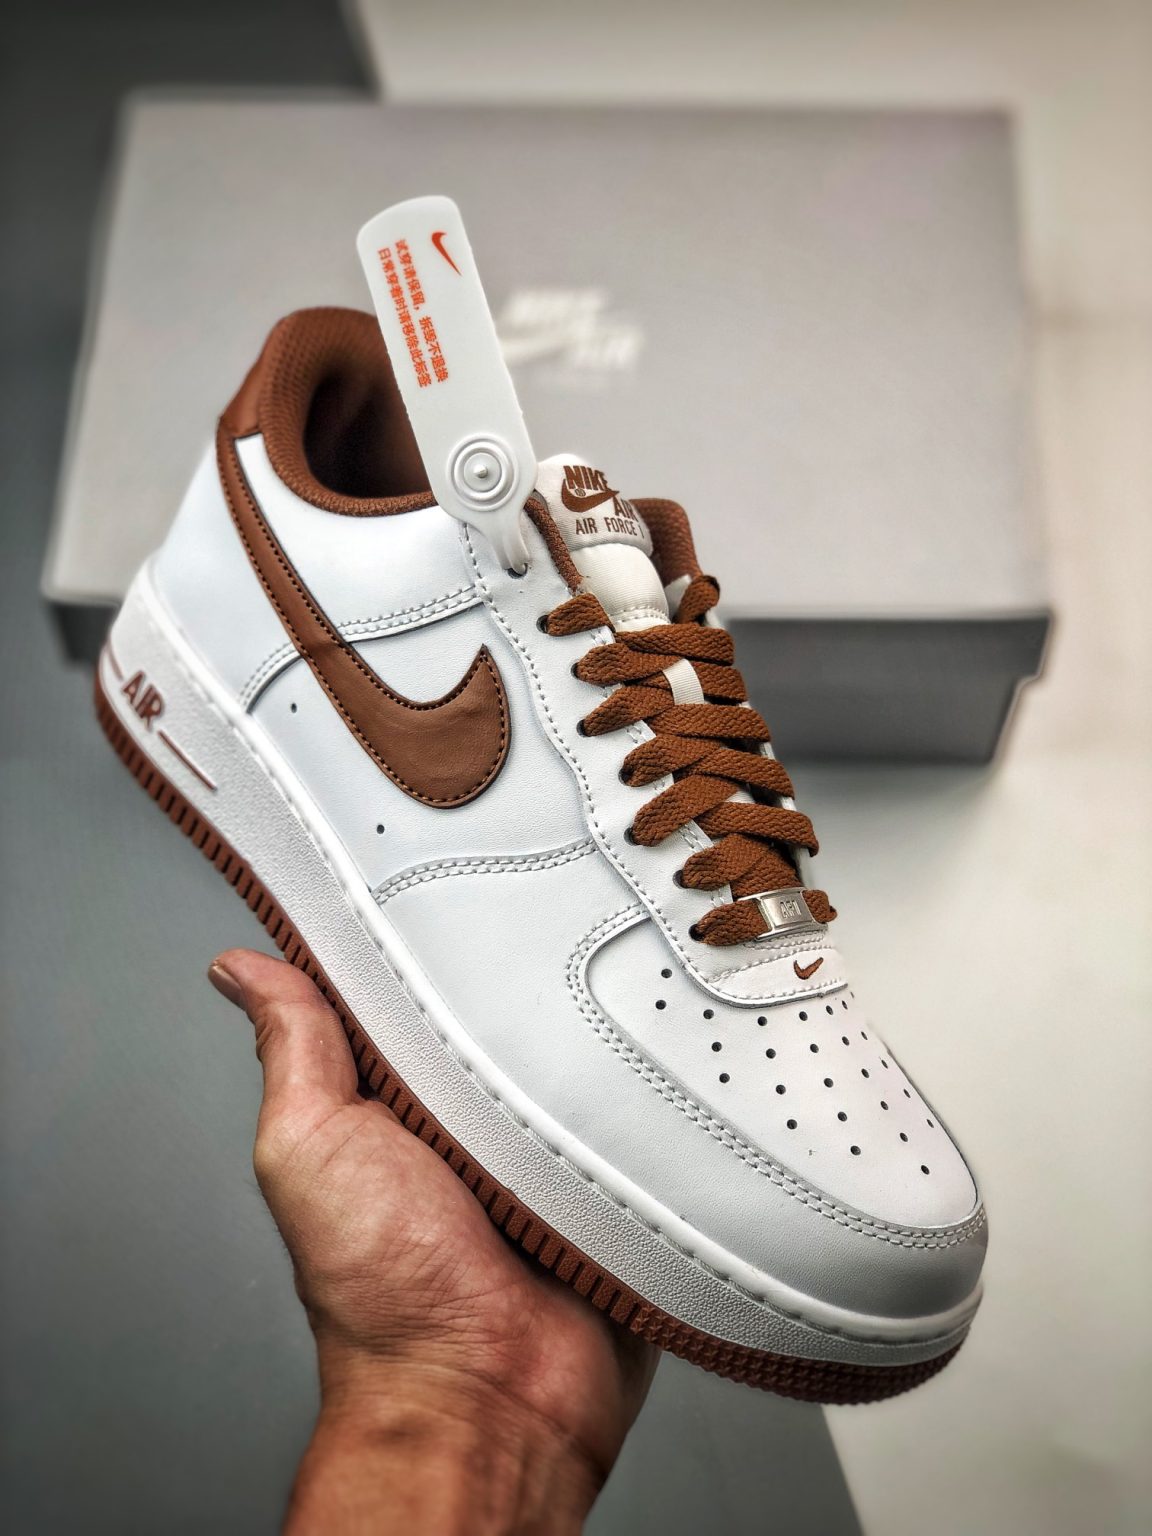 Nike Air Force 1 Low White/Pecan-White DH7561-100 For Sale – Sneaker Hello